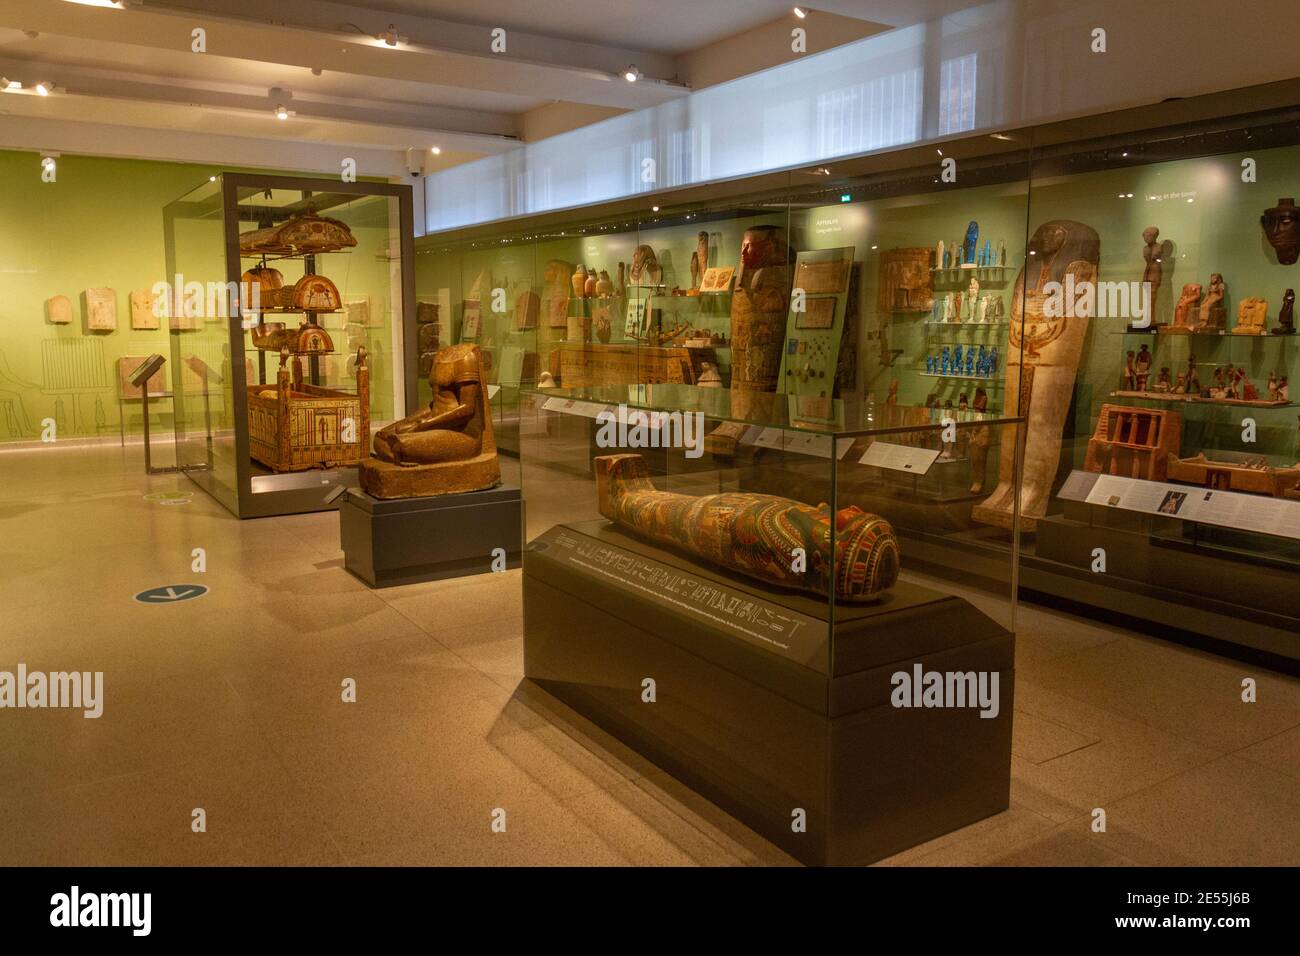 General view of Egyptian exhibits in the Ashmolean Museum, the University of Oxford's museum of art and archaeology, Oxford UK. Stock Photo